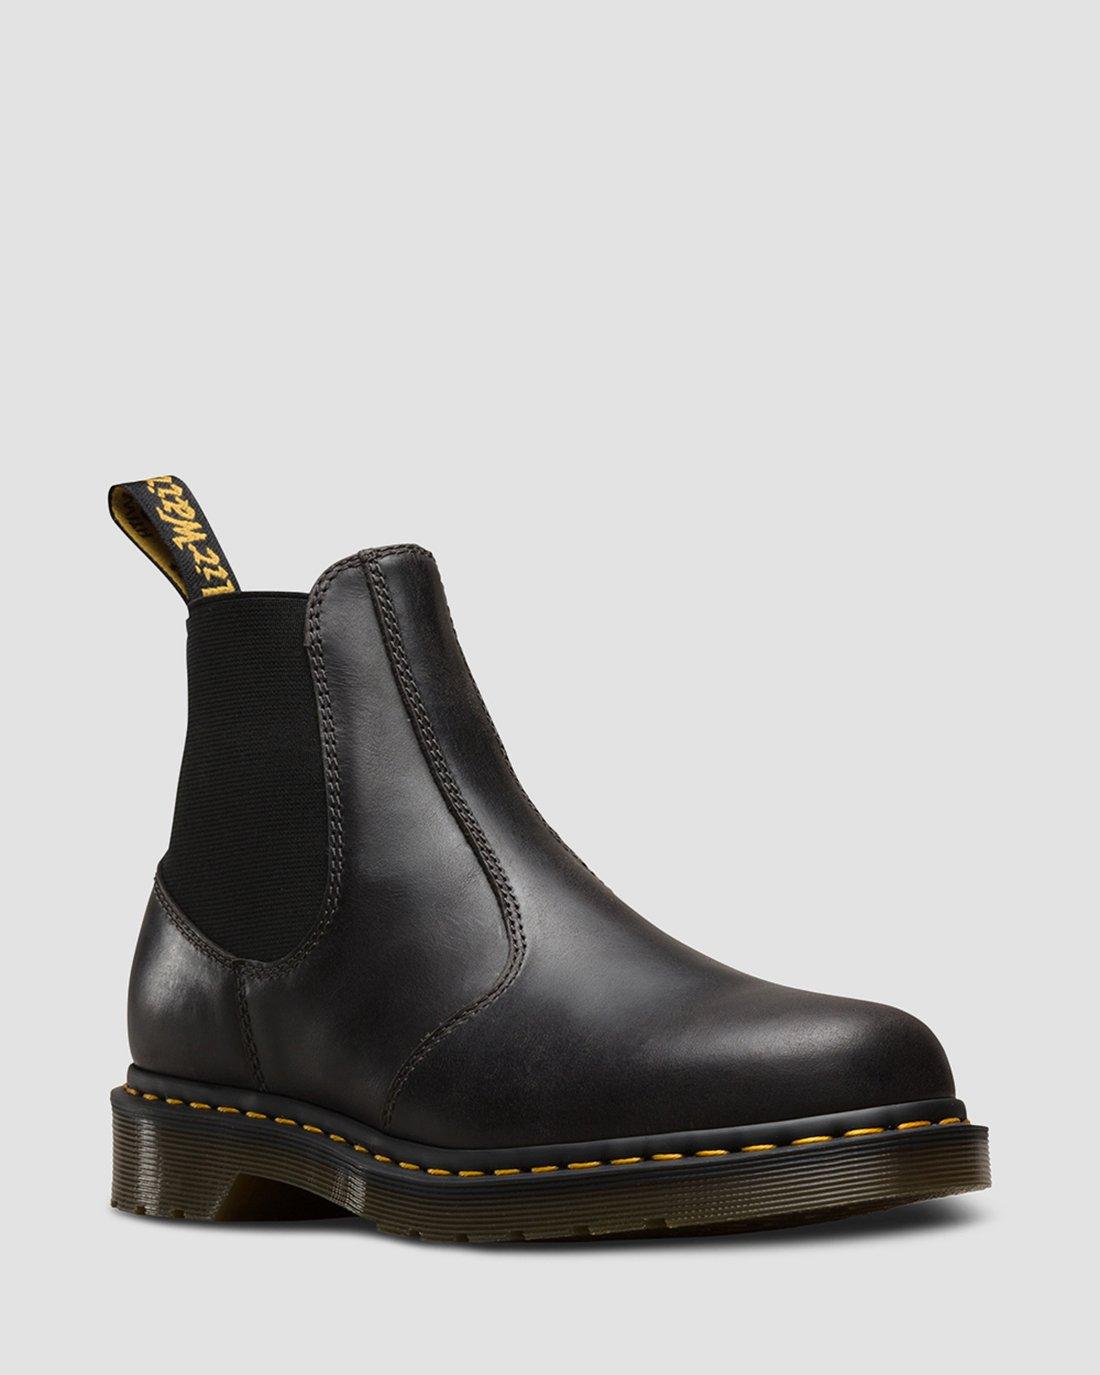 2976 Hardy Orleans2976 Hardy Orleans Dr. Martens